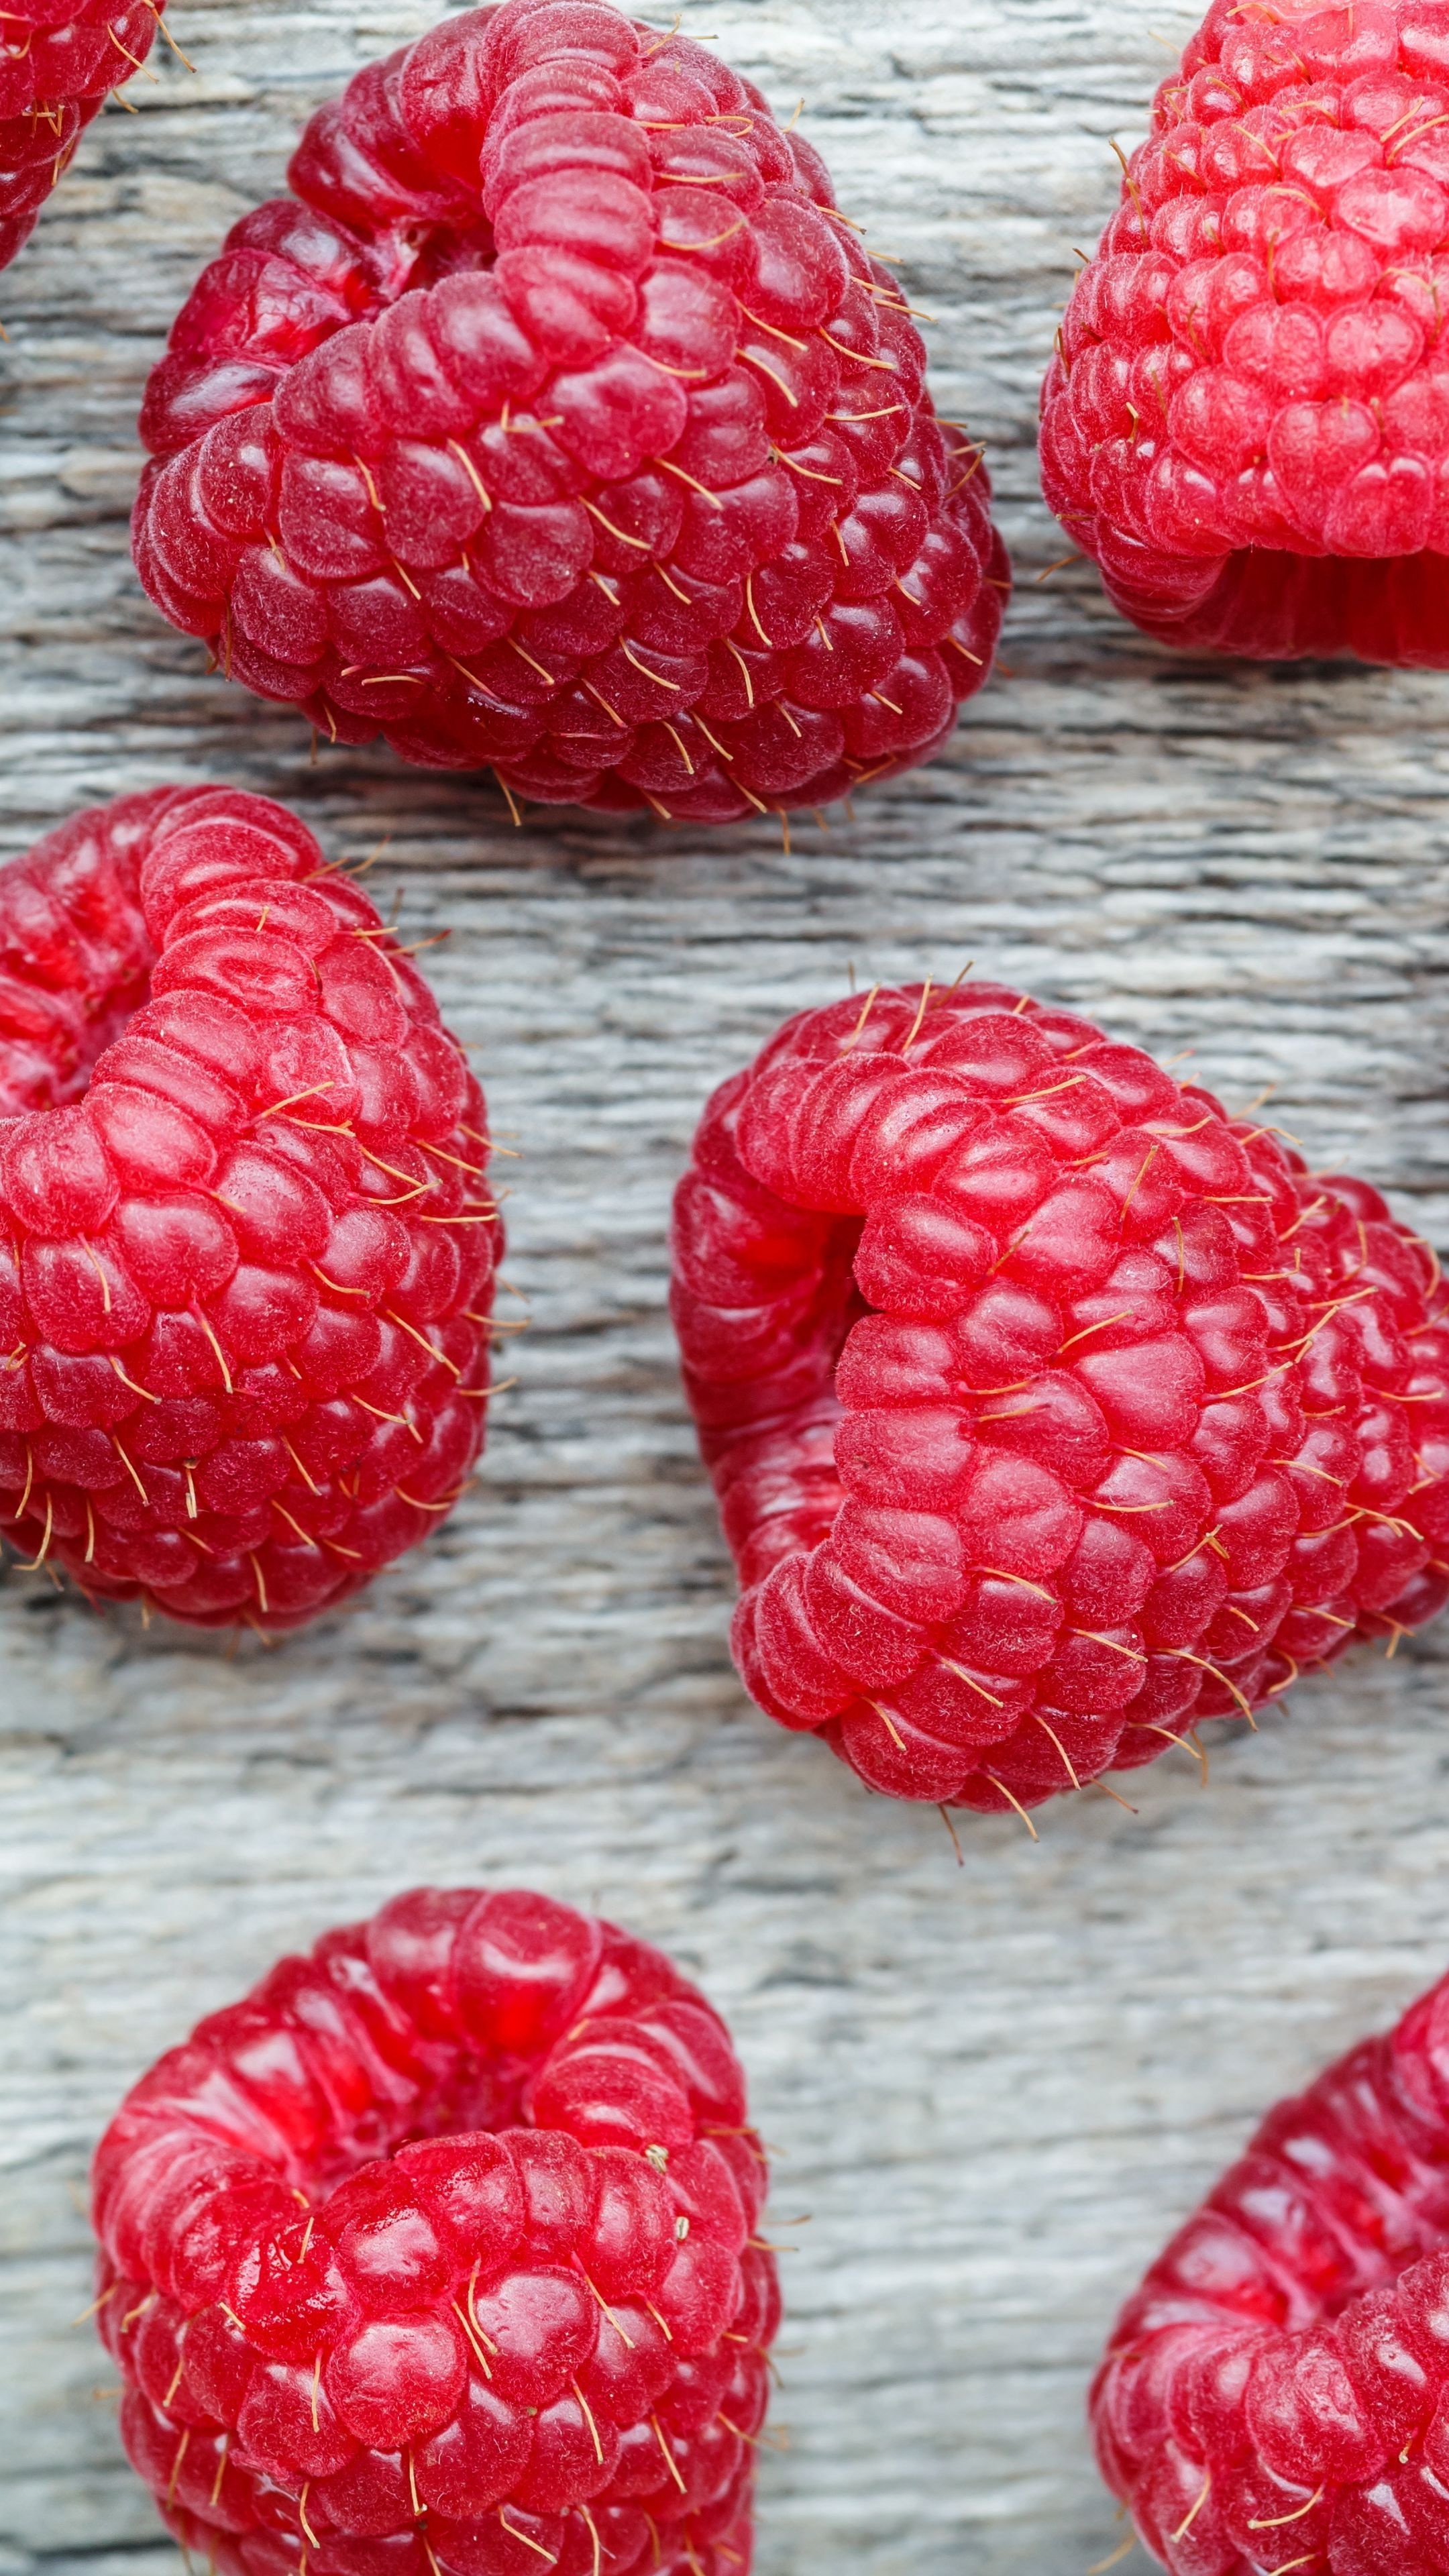 Cool raspberry wallpapers, Trendy and stylish, Up to date, Latest and greatest, 2160x3840 4K Phone